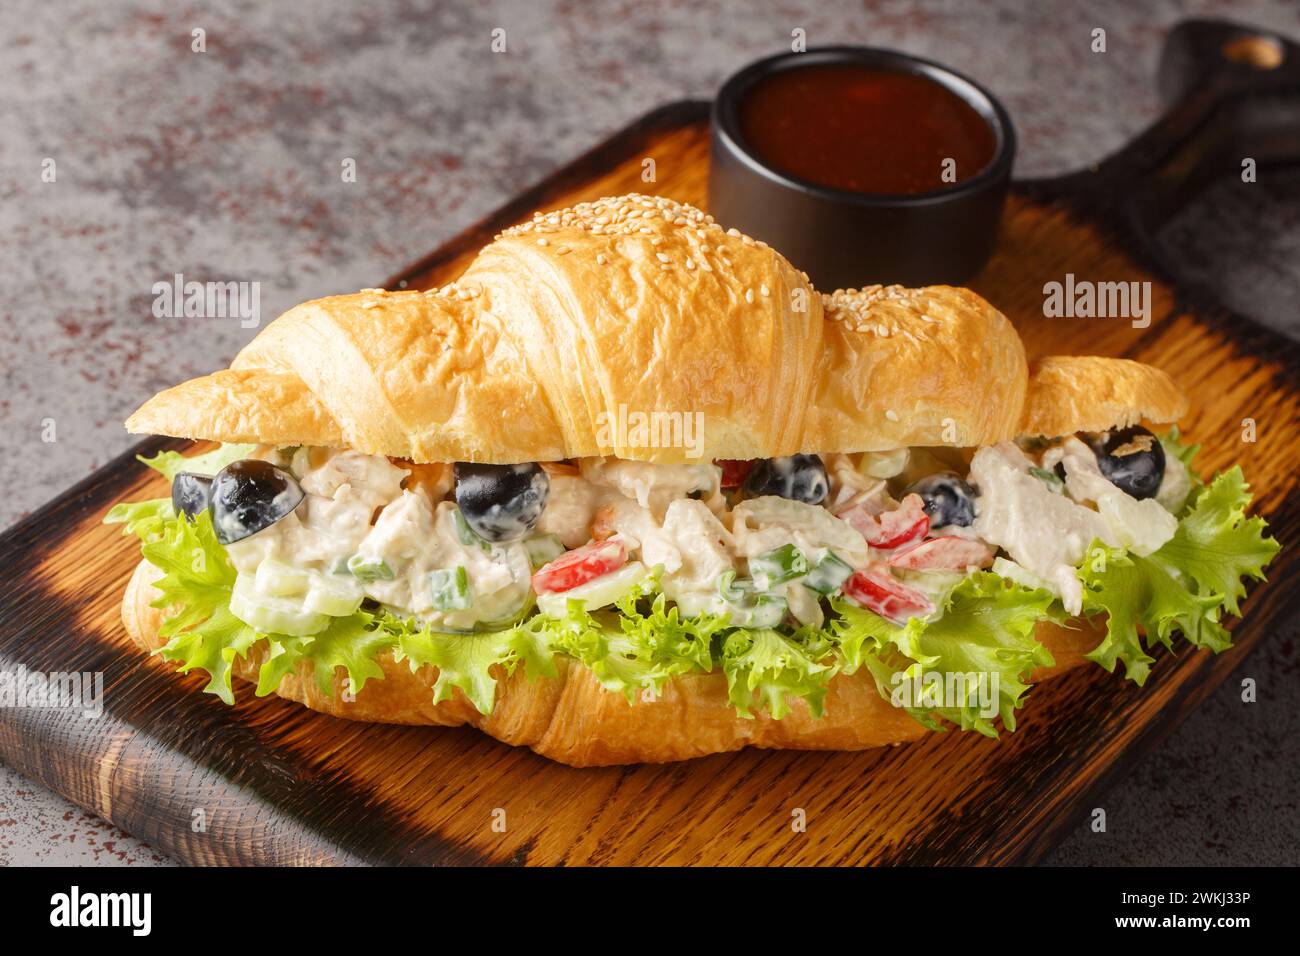 Homemade Healthy Chicken Salad Croissant Sandwich closeup on a wooden board on the table. Horizontal Stock Photo